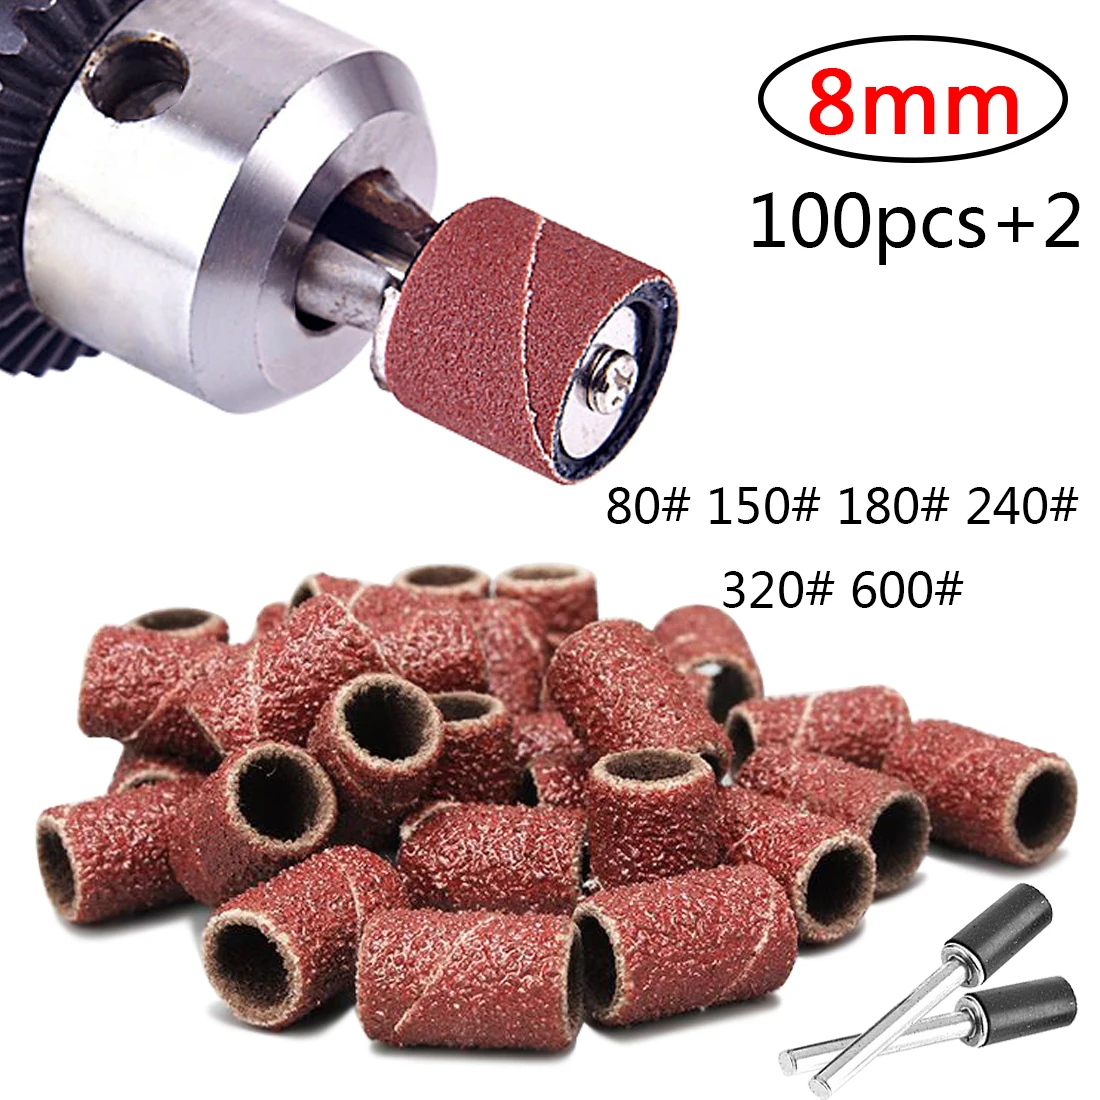 50 pcs 12mm 1/2" inch extra fine GRIT 320 Rotary SANDING DRUM with 2 Mandrel 